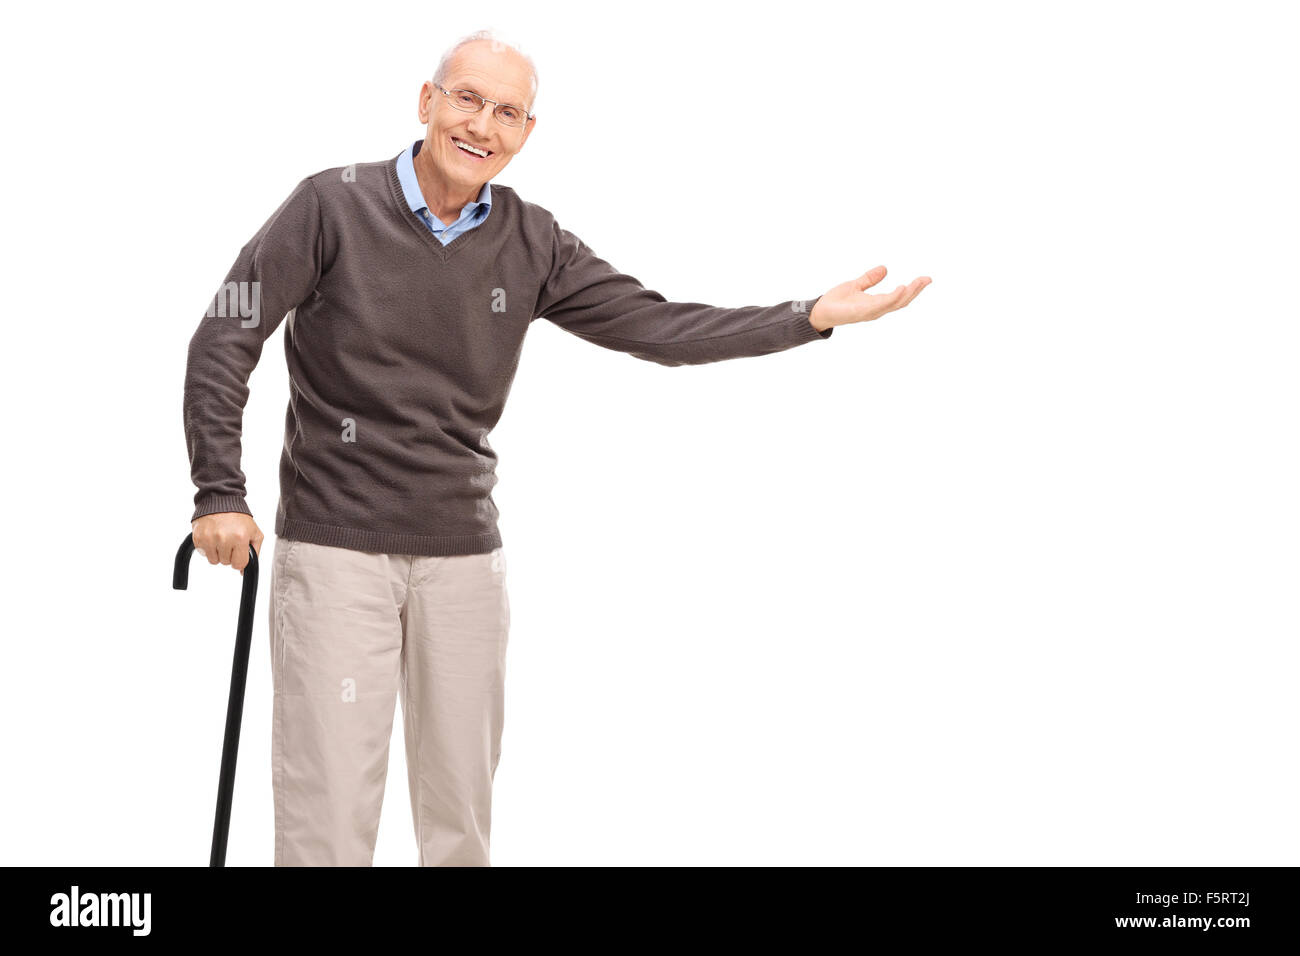 Old man with a cane smiling and gesturing with his hand isolated on white background Stock Photo